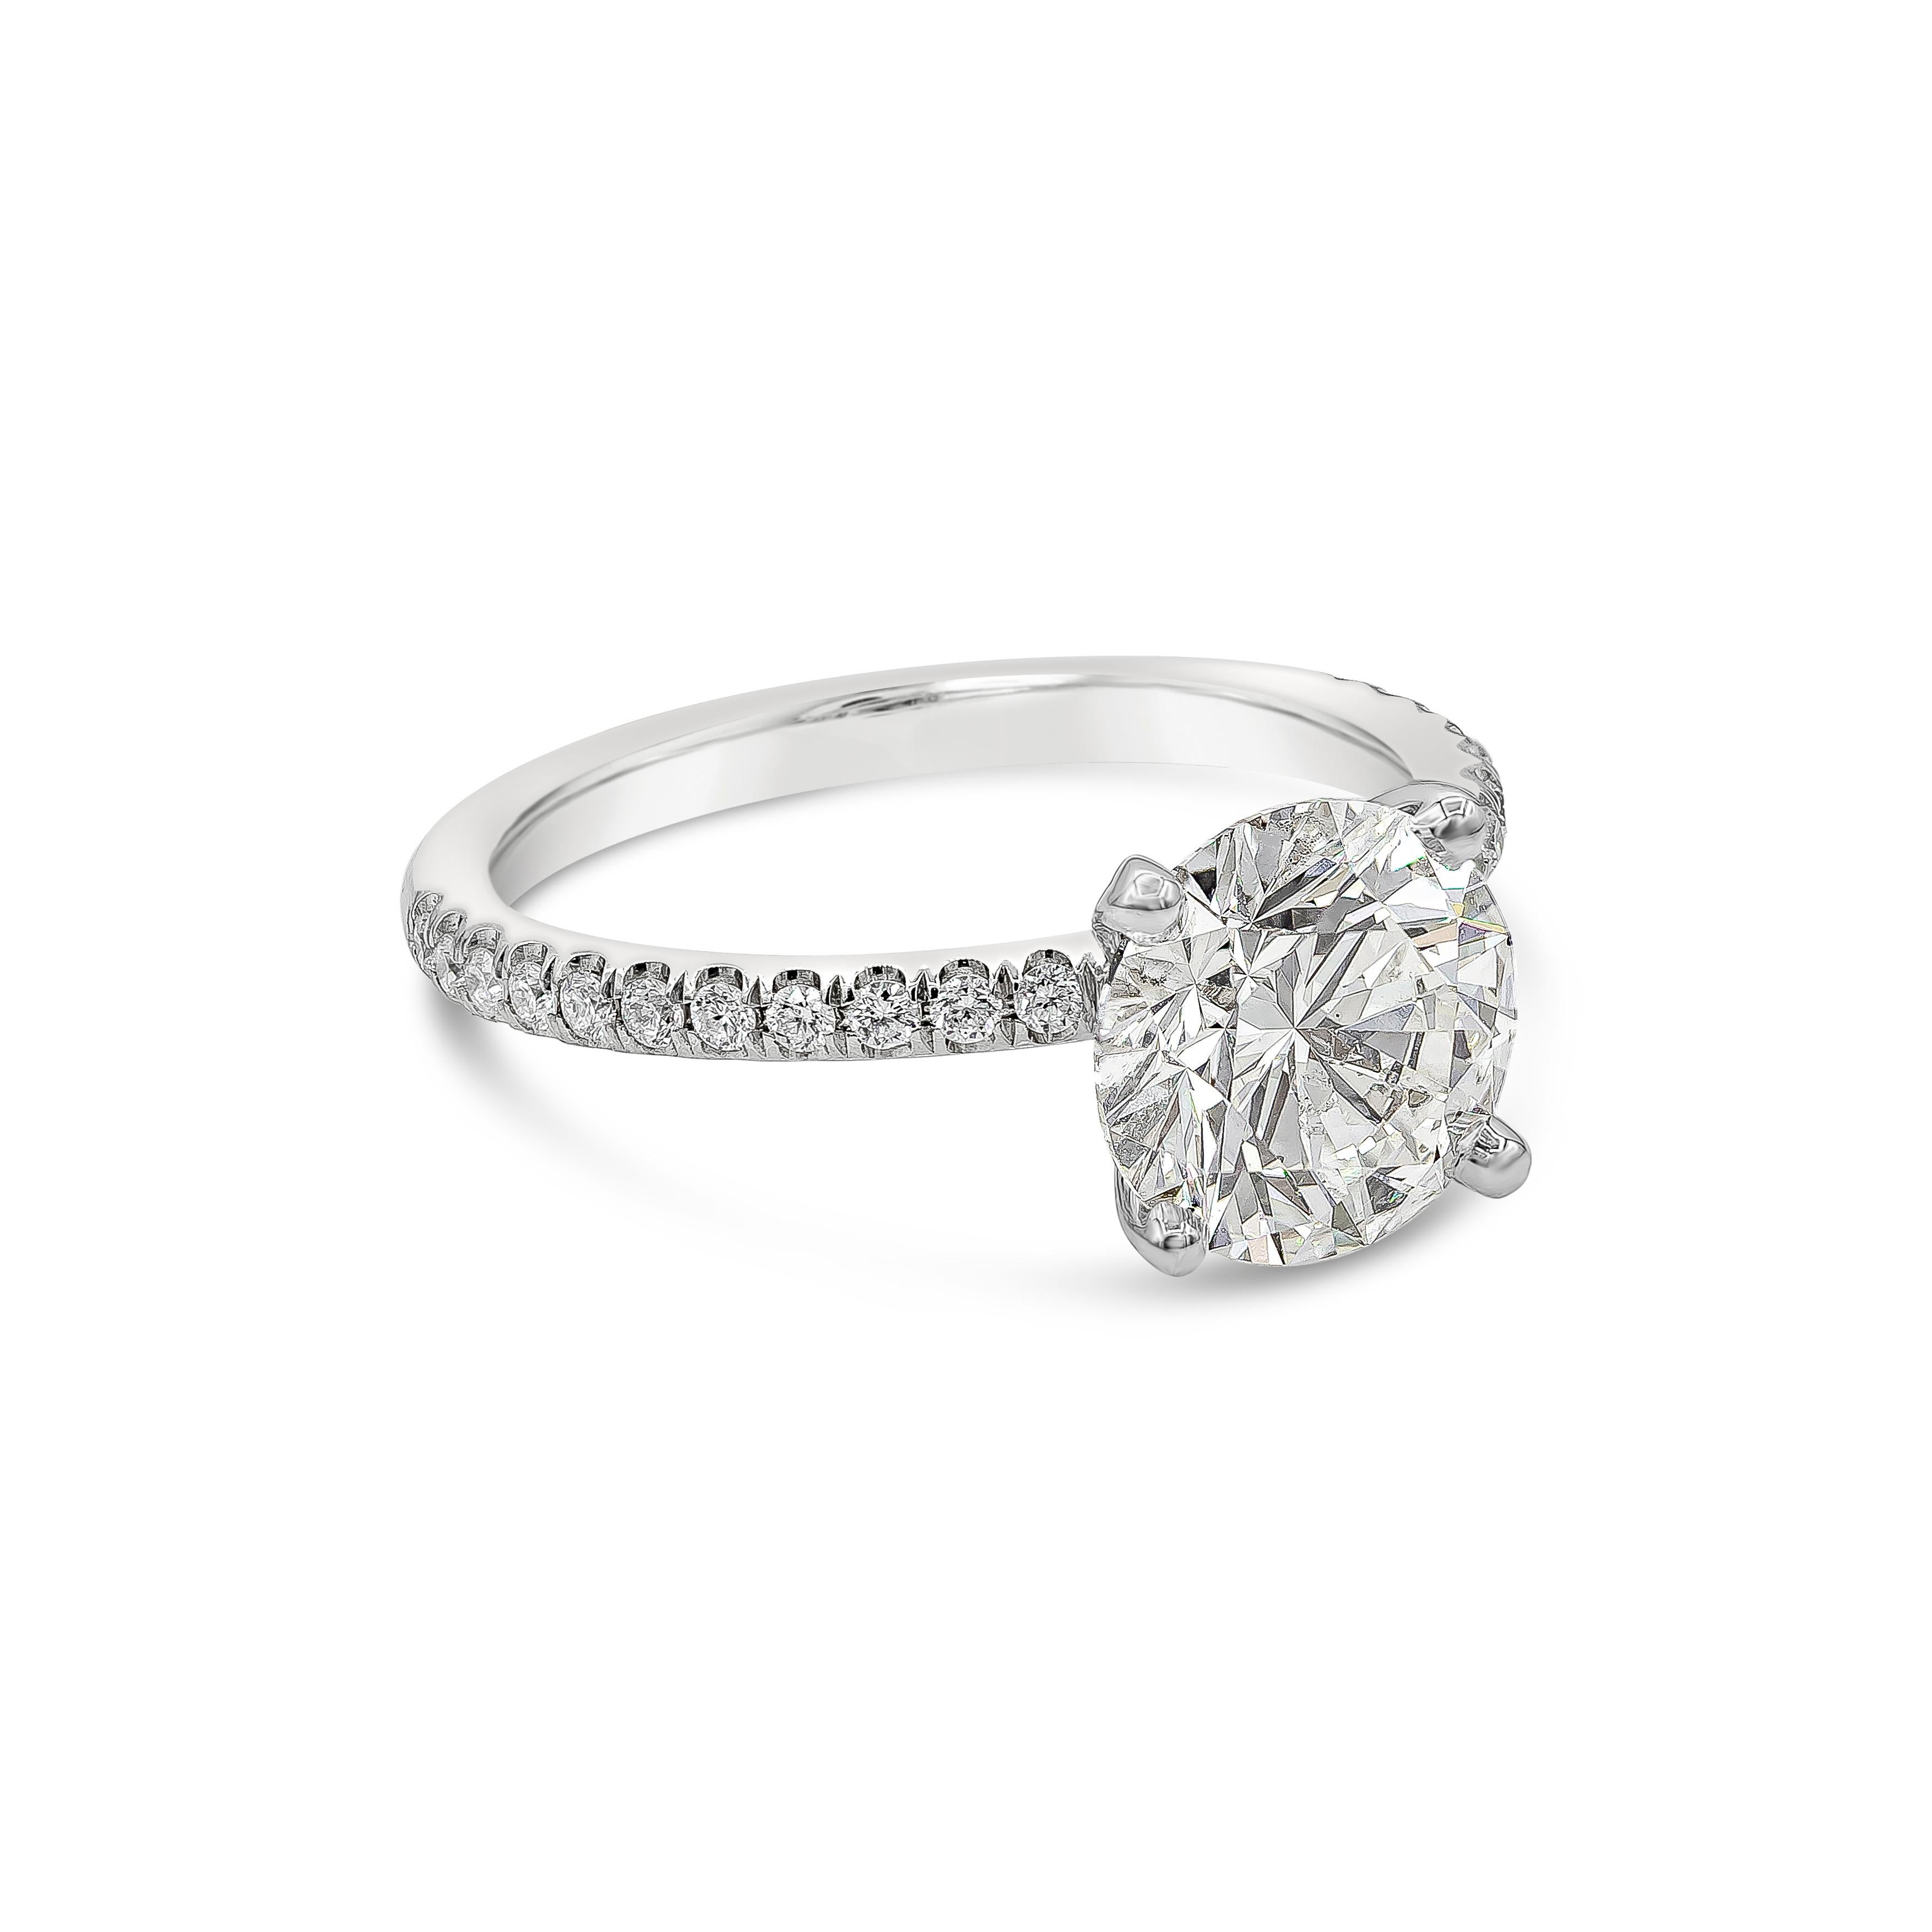 A classic pave engagement ring style showcasing a 2.10 carat round brilliant diamond, certified by GIA as G color, SI2 clarity. Set in a diamond encrusted shank made in 18k white gold. Accent diamonds weigh 0.20 carats total.

Style available in